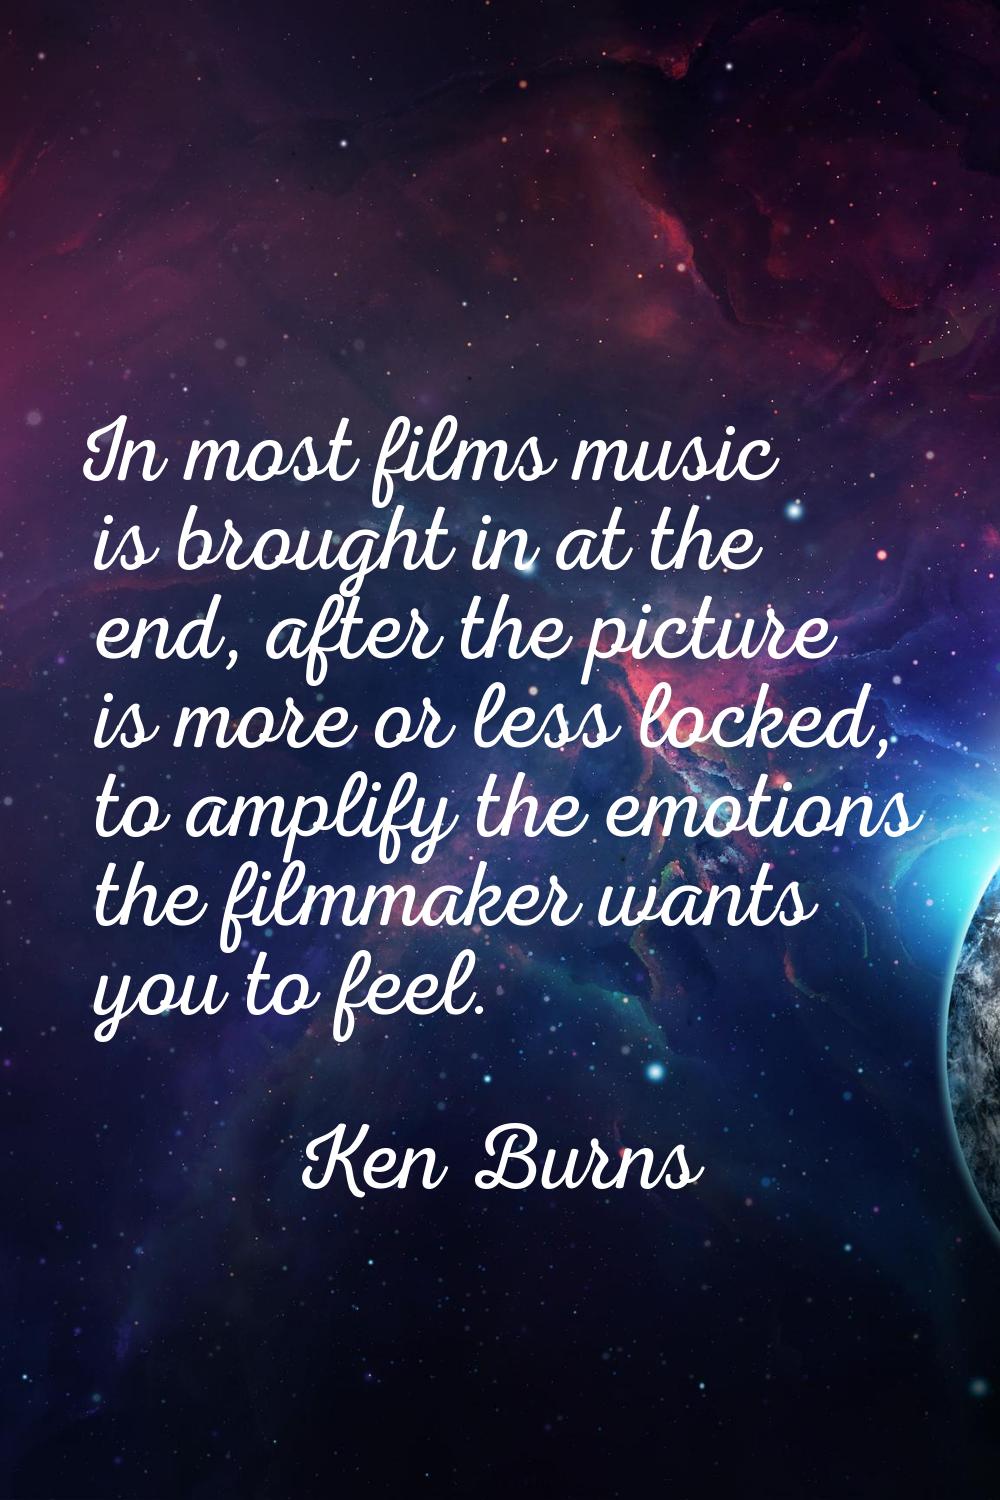 In most films music is brought in at the end, after the picture is more or less locked, to amplify 